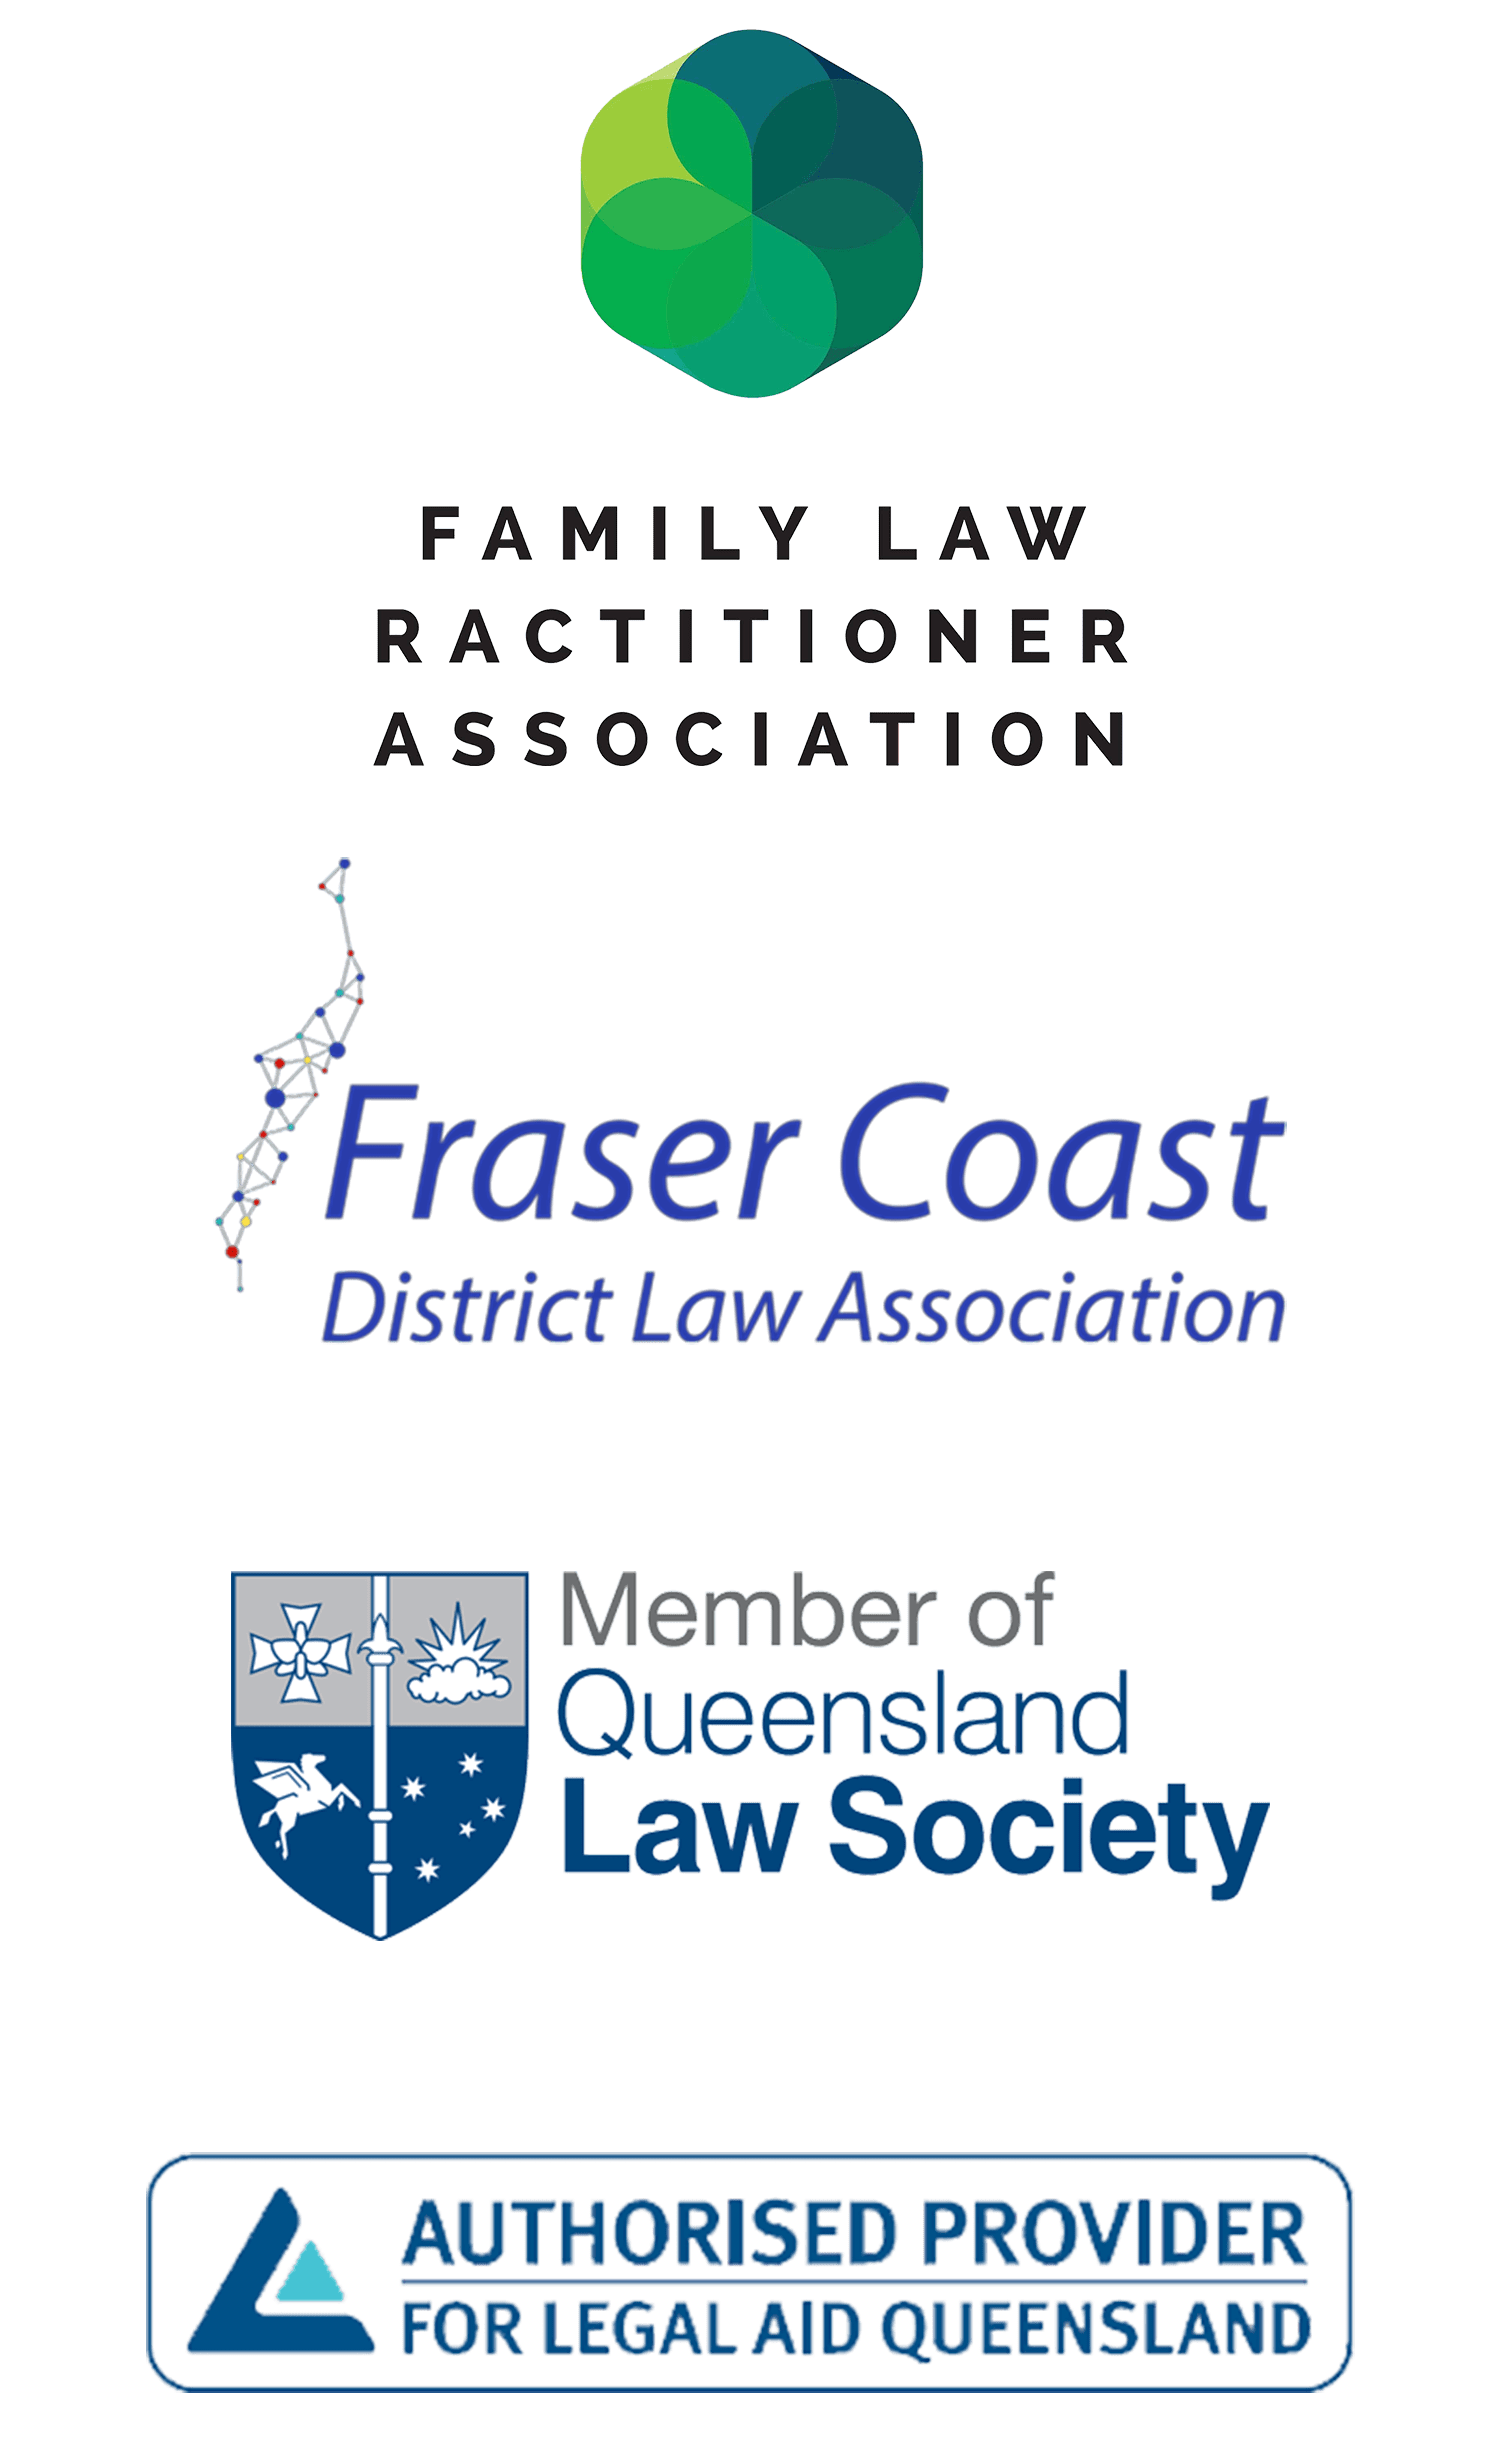 Wills & Estate Lawyer Solicitor Hervey Bay Associations our firm is part of